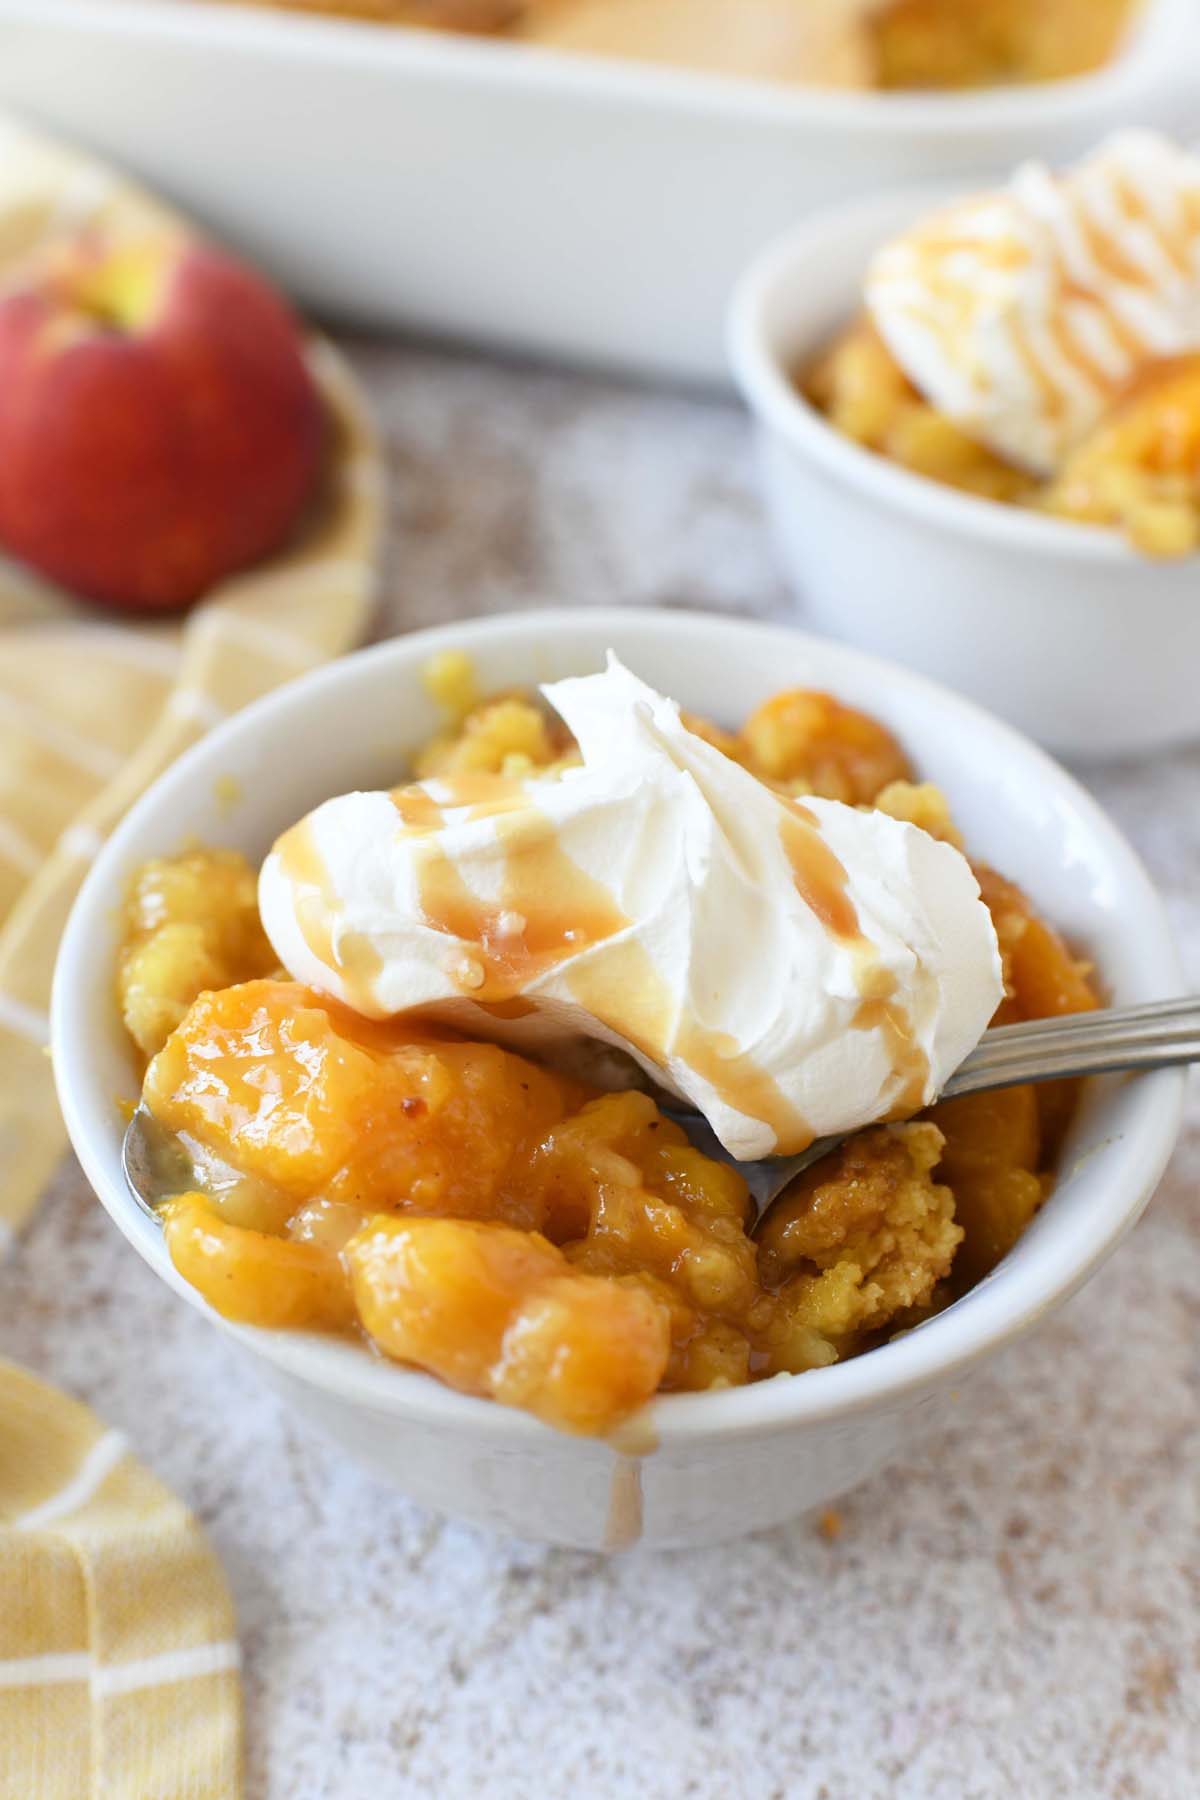 Peach Dump Cake with whipped cream and caramel.